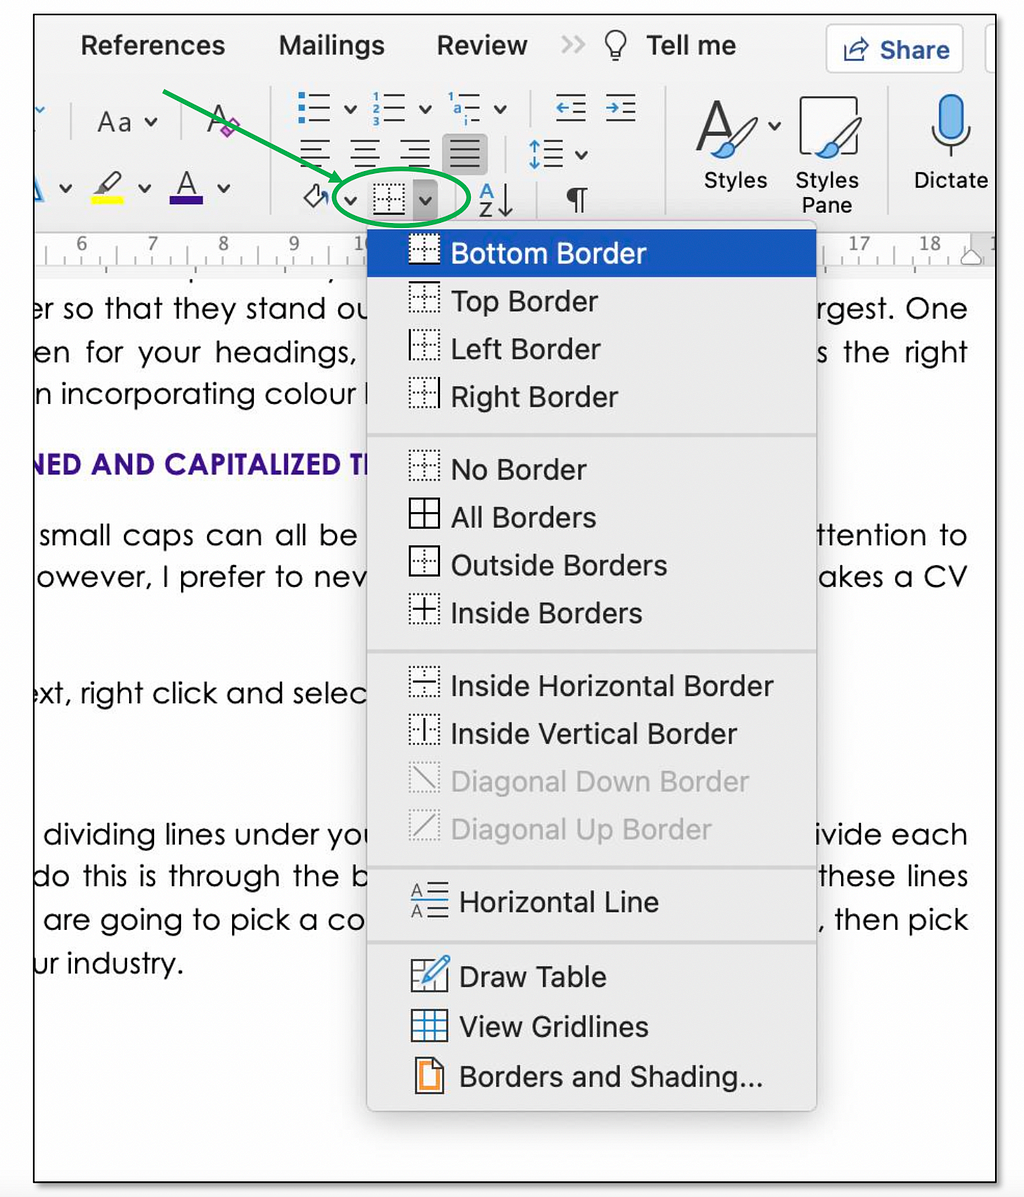 How to insert borders and dividing lines in Microsoft Word